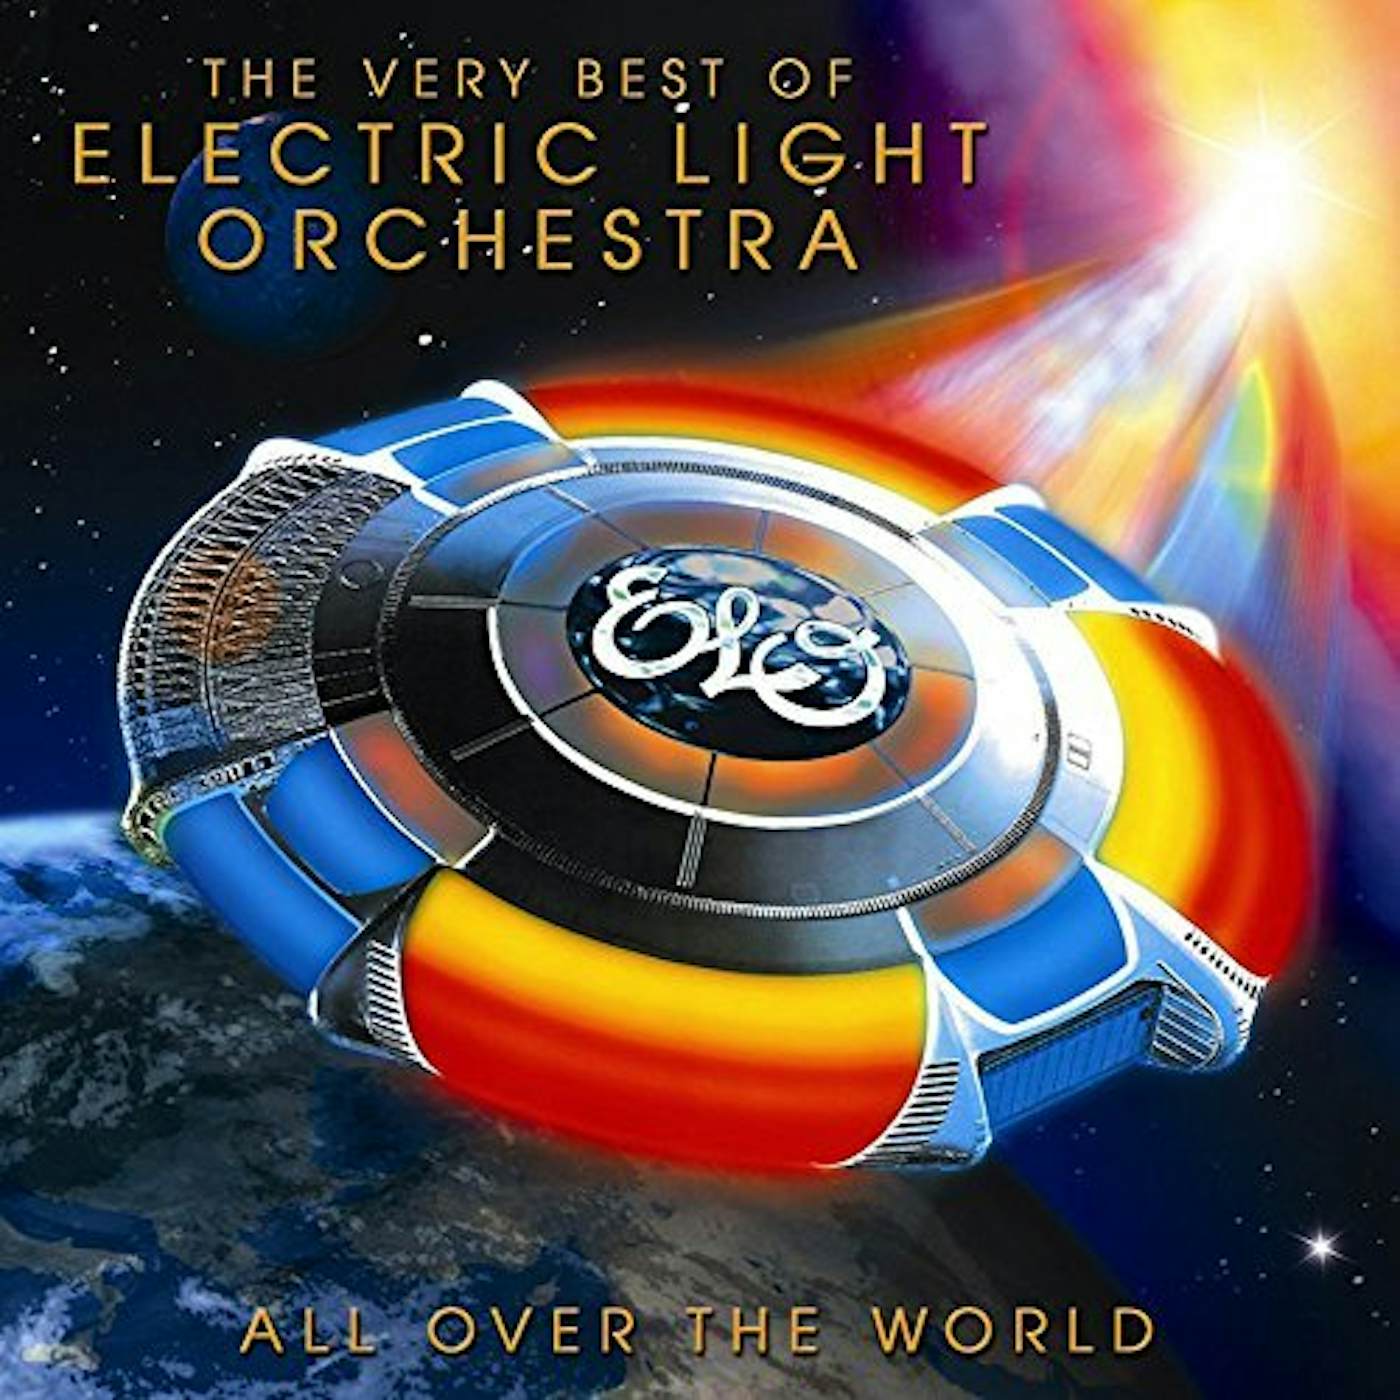 ELO (Electric Light Orchestra) ALL OVER THE WORLD: VERY BEST OF Vinyl Record